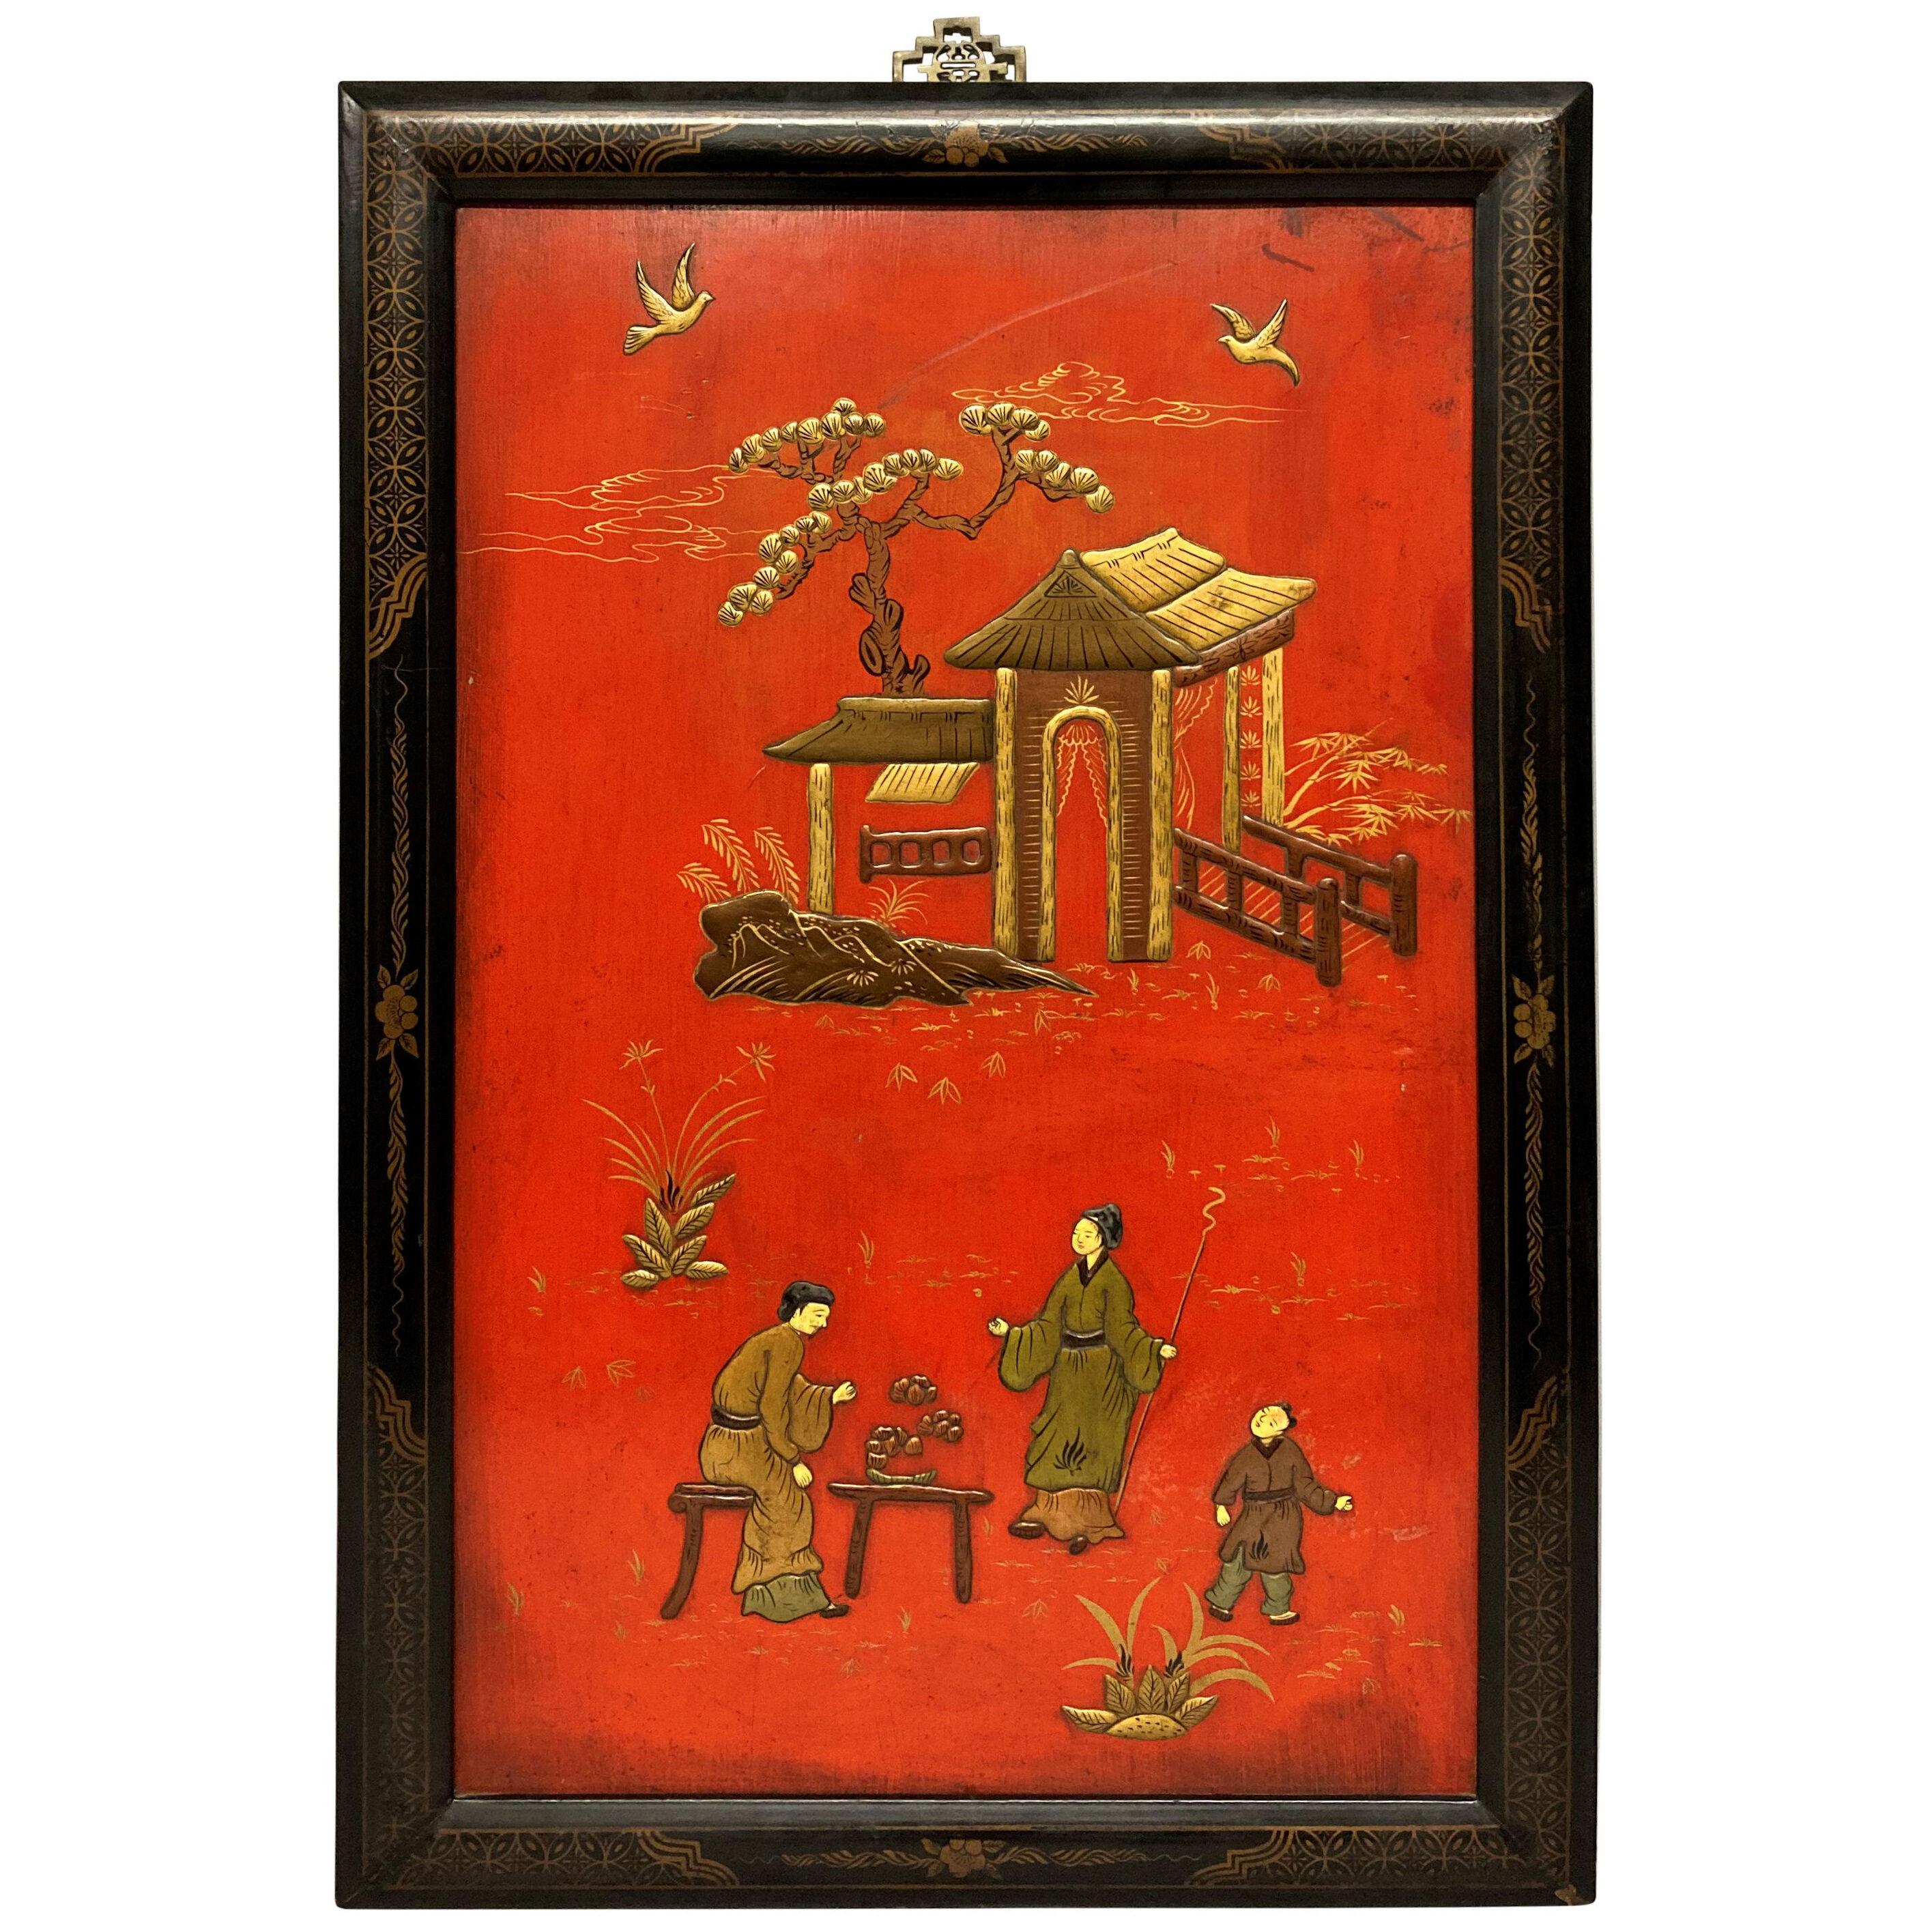 A FRAMED SCARLET LACQUERED CHINESE PANEL